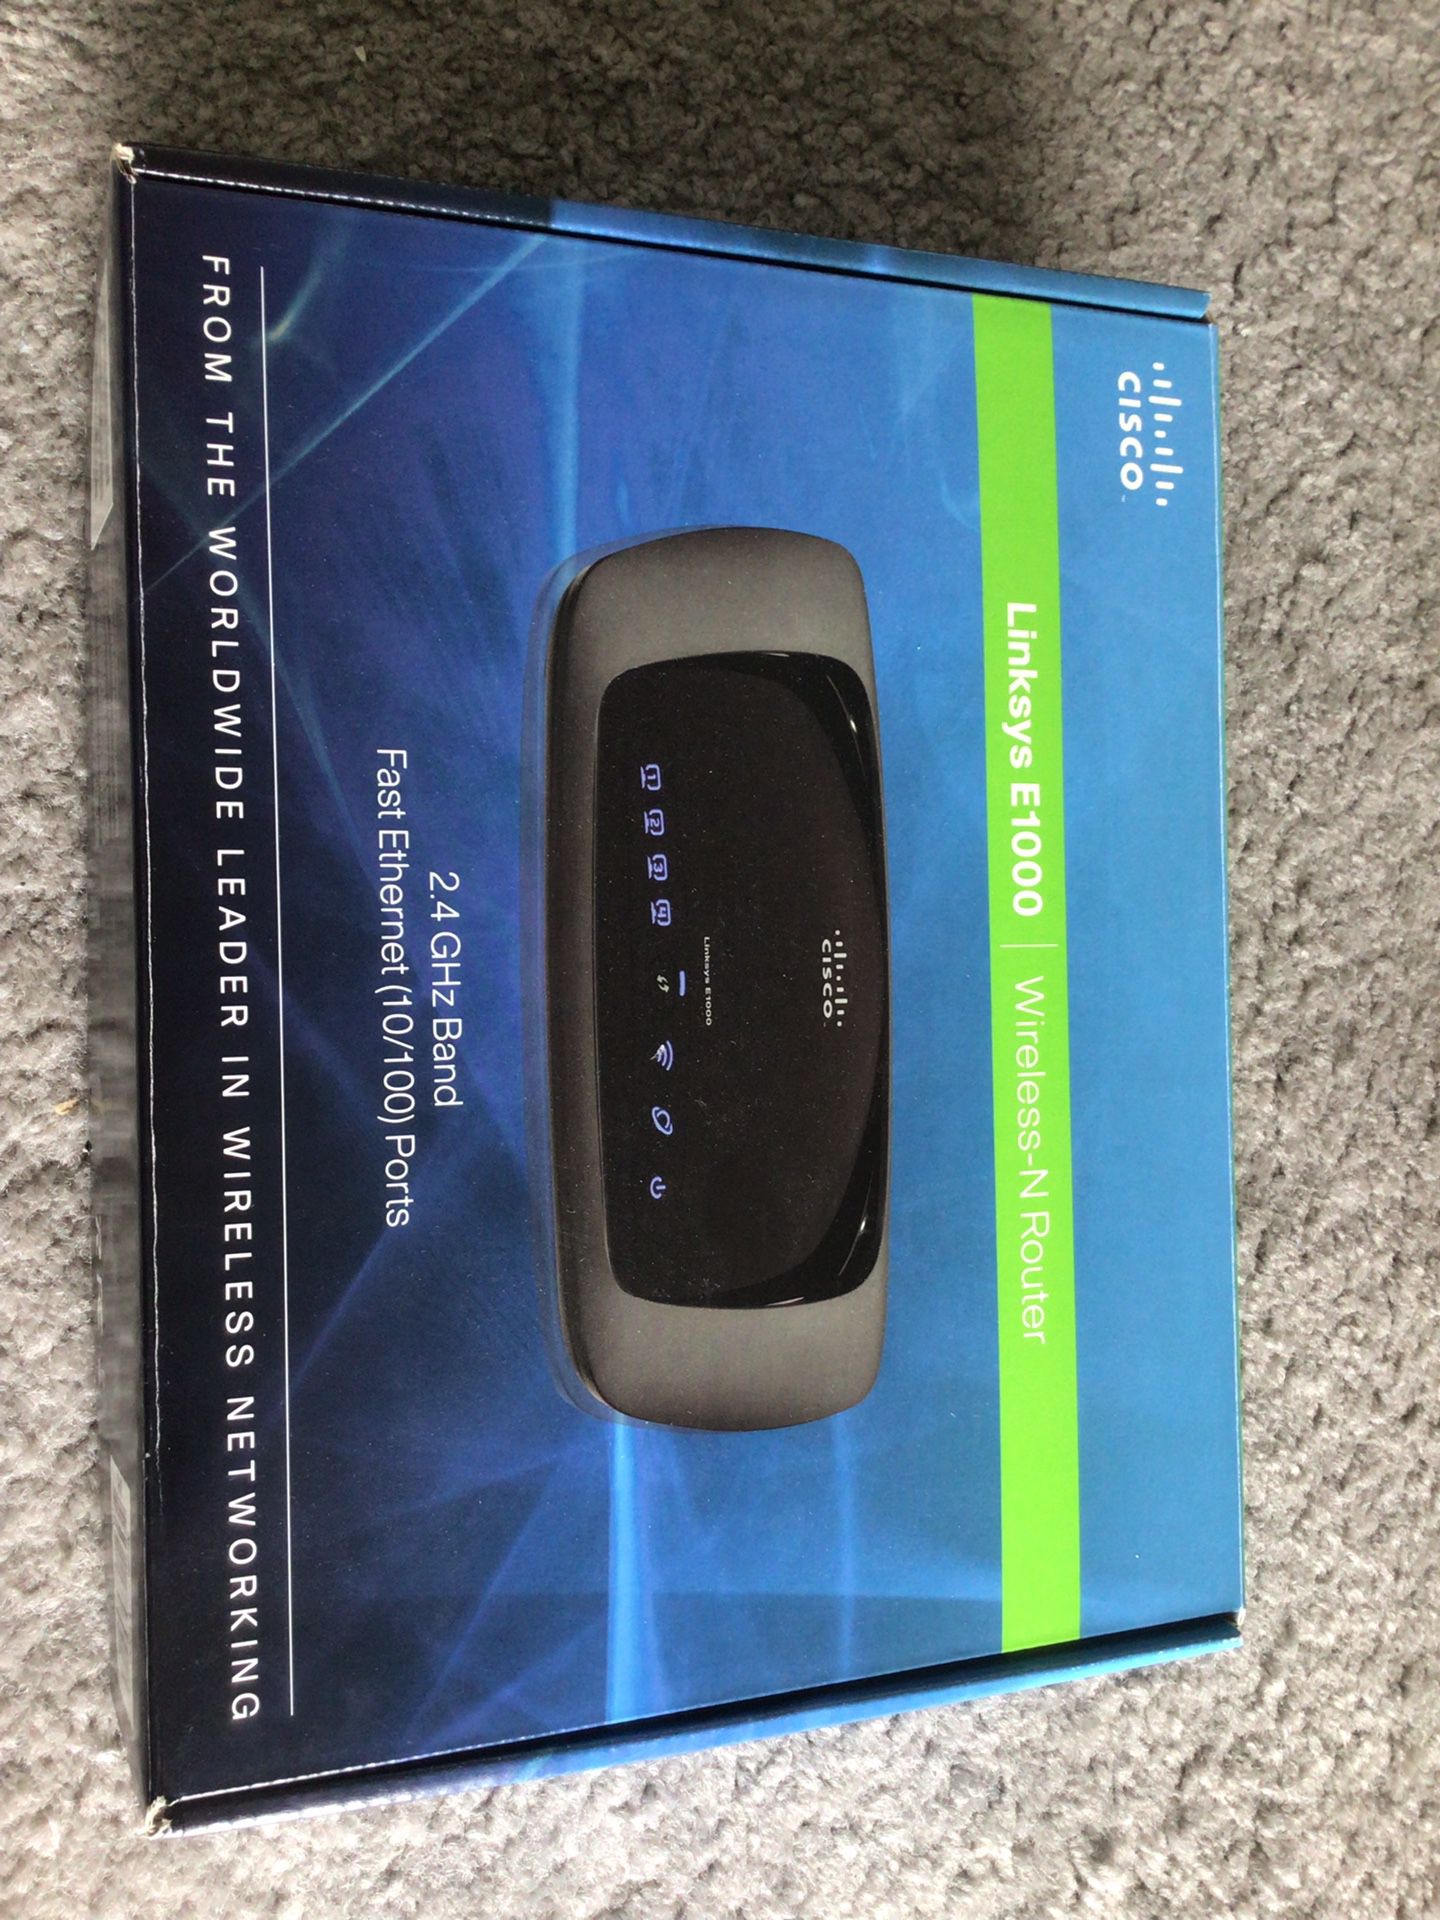 Linksys Router $30